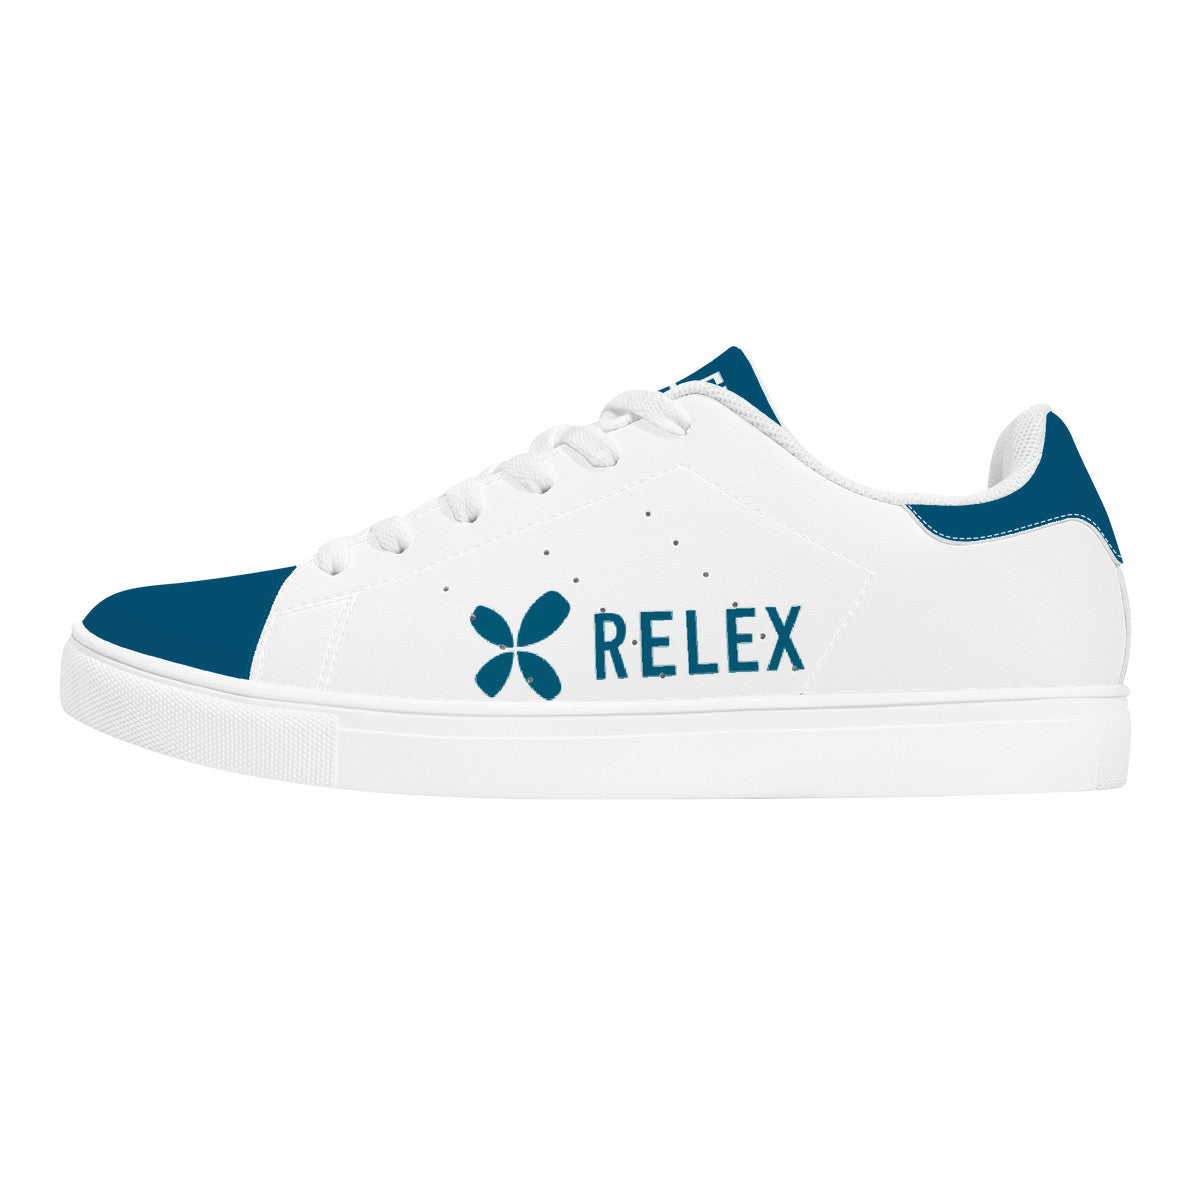 V1 RELEX | Low-Top Synthetic Leather Sneakers - White - Shoe Zero